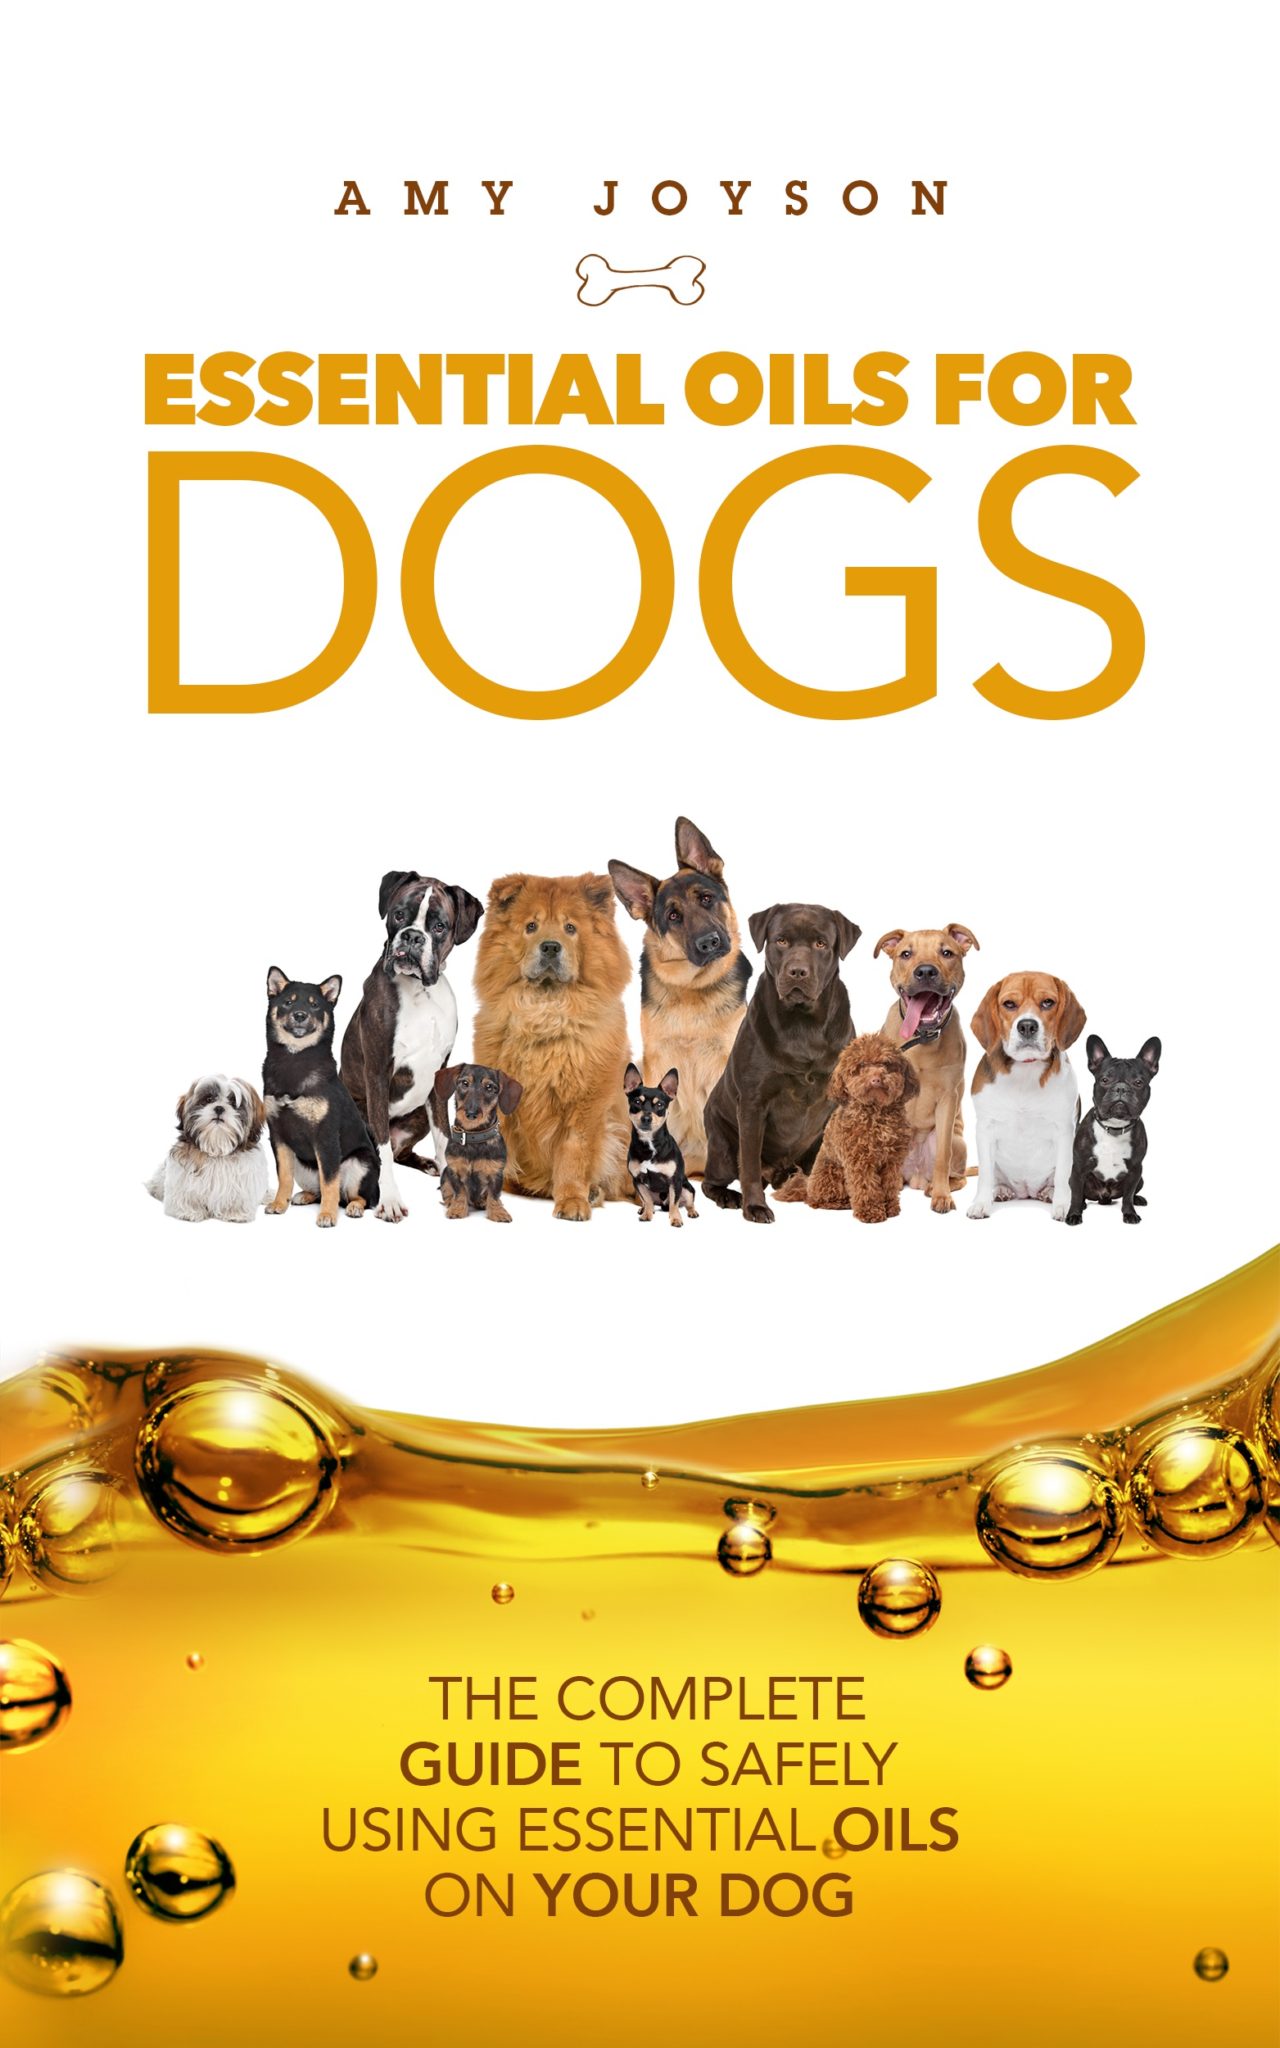 FREE: Essential Oils For Dogs: The Complete Guide To Safely Using Essential Oils On Your Dog (Essential oil, Aromatherapy and Pet Care Book 1) by Amy Joyson